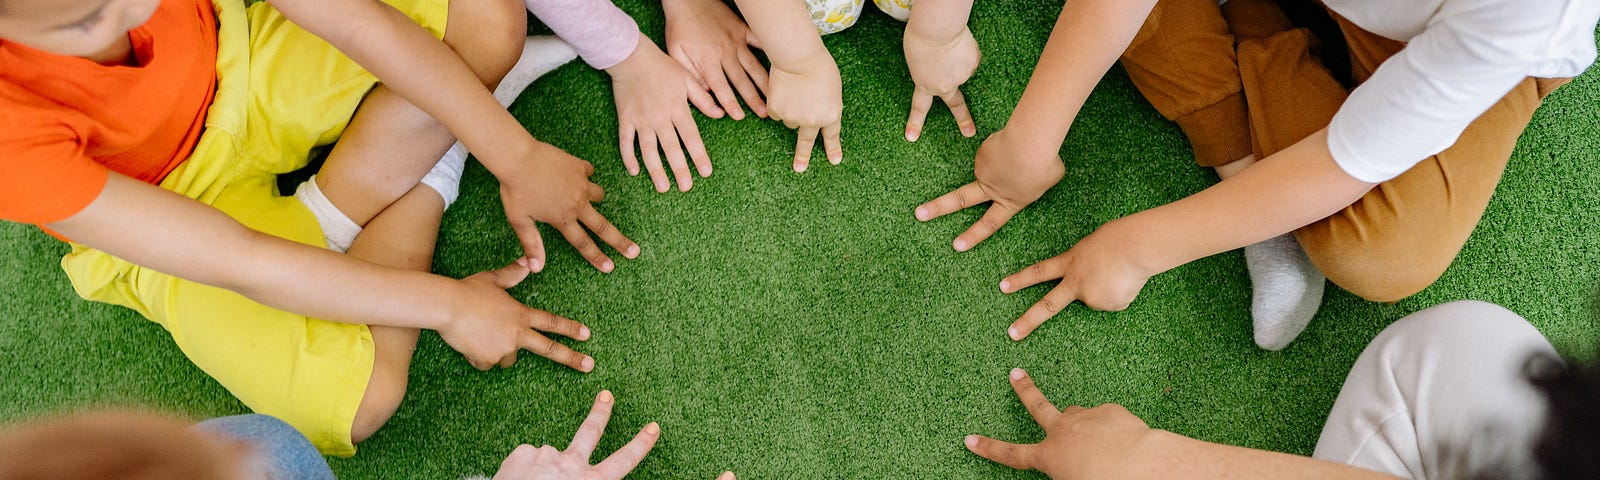 School children sit in a circle, with hands in middle.